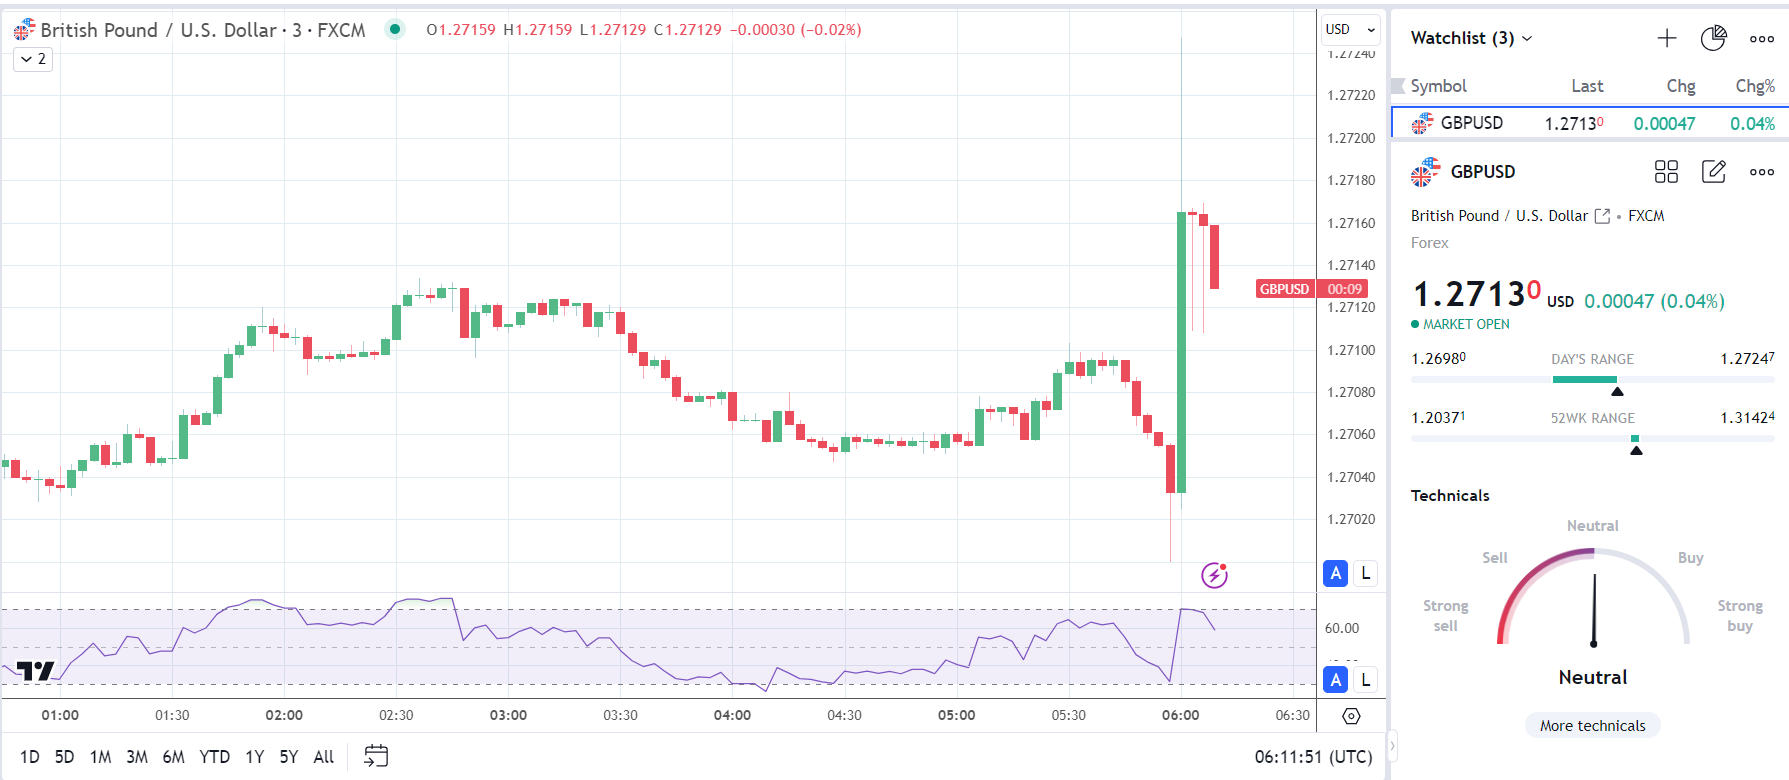 GBP to USD reaction to May UK Inflation Report.